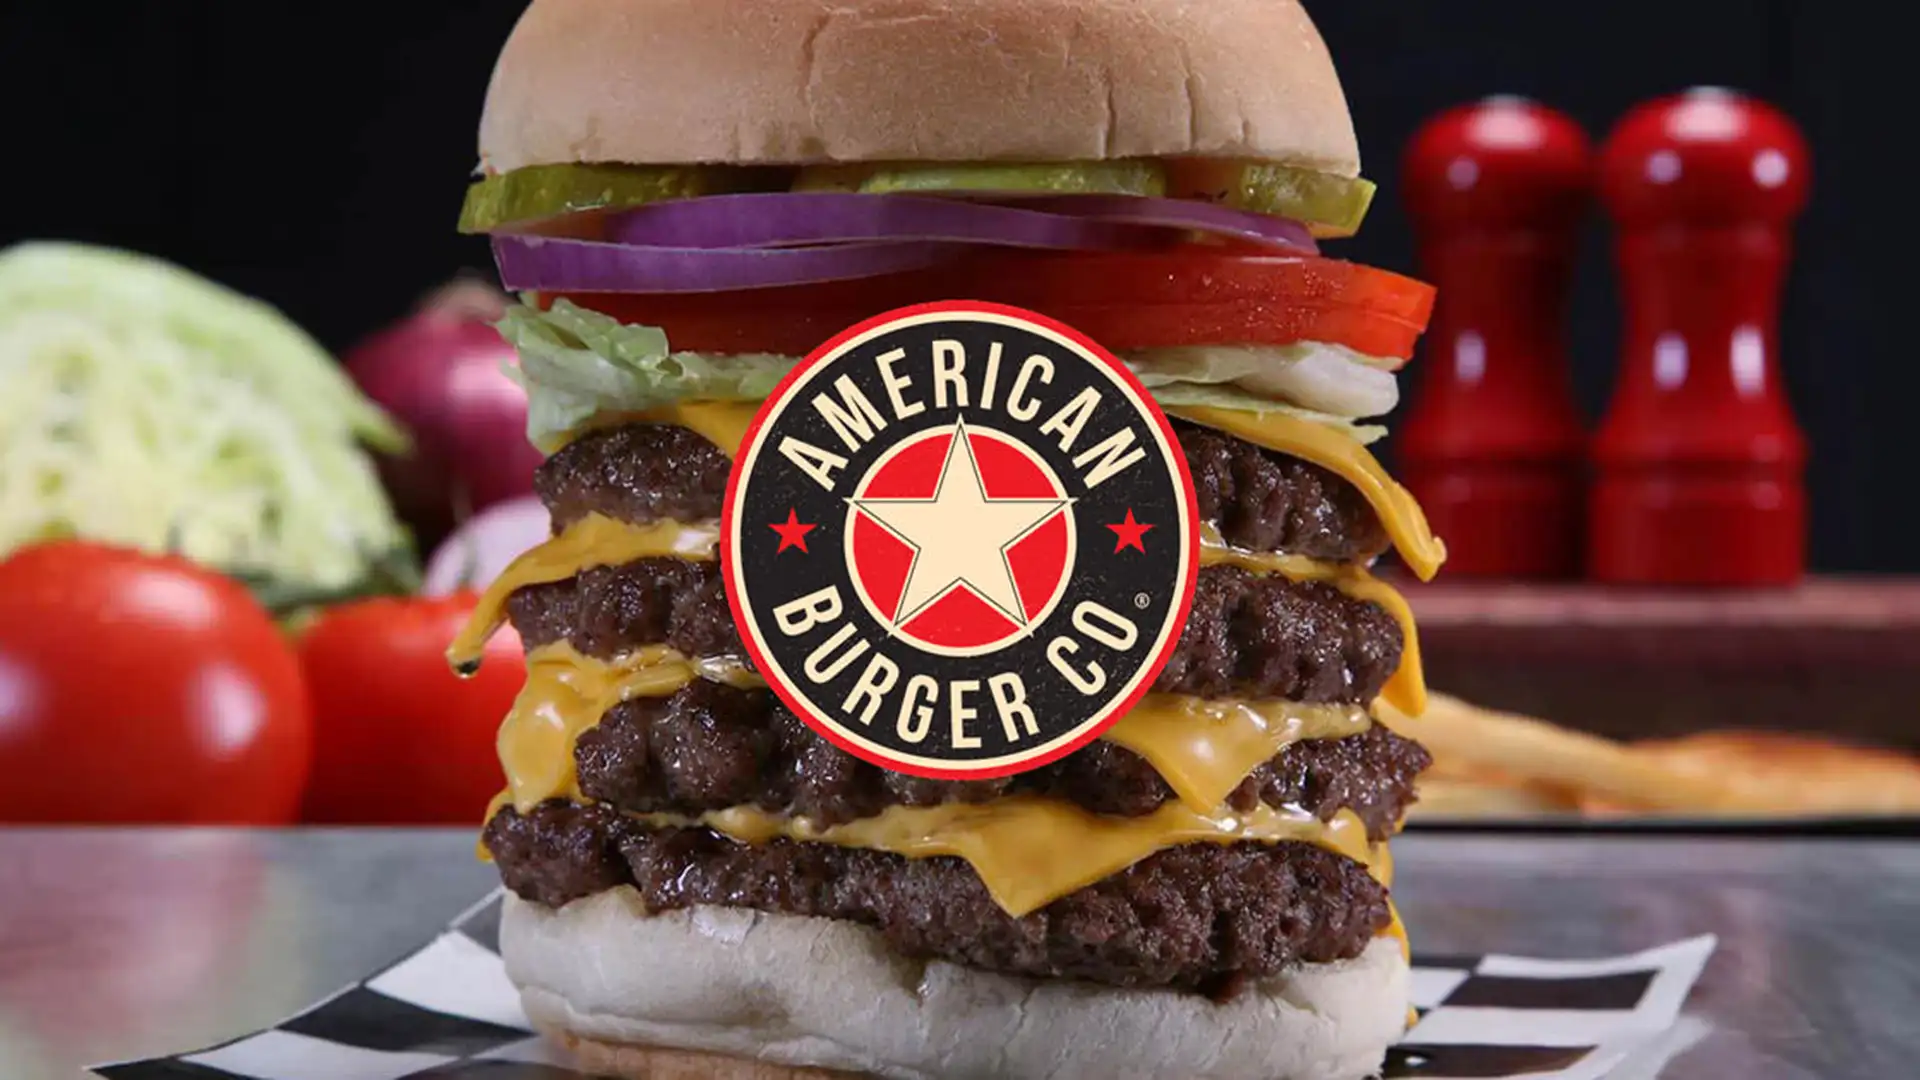 Product shot of American Burger Co. cheese burger.